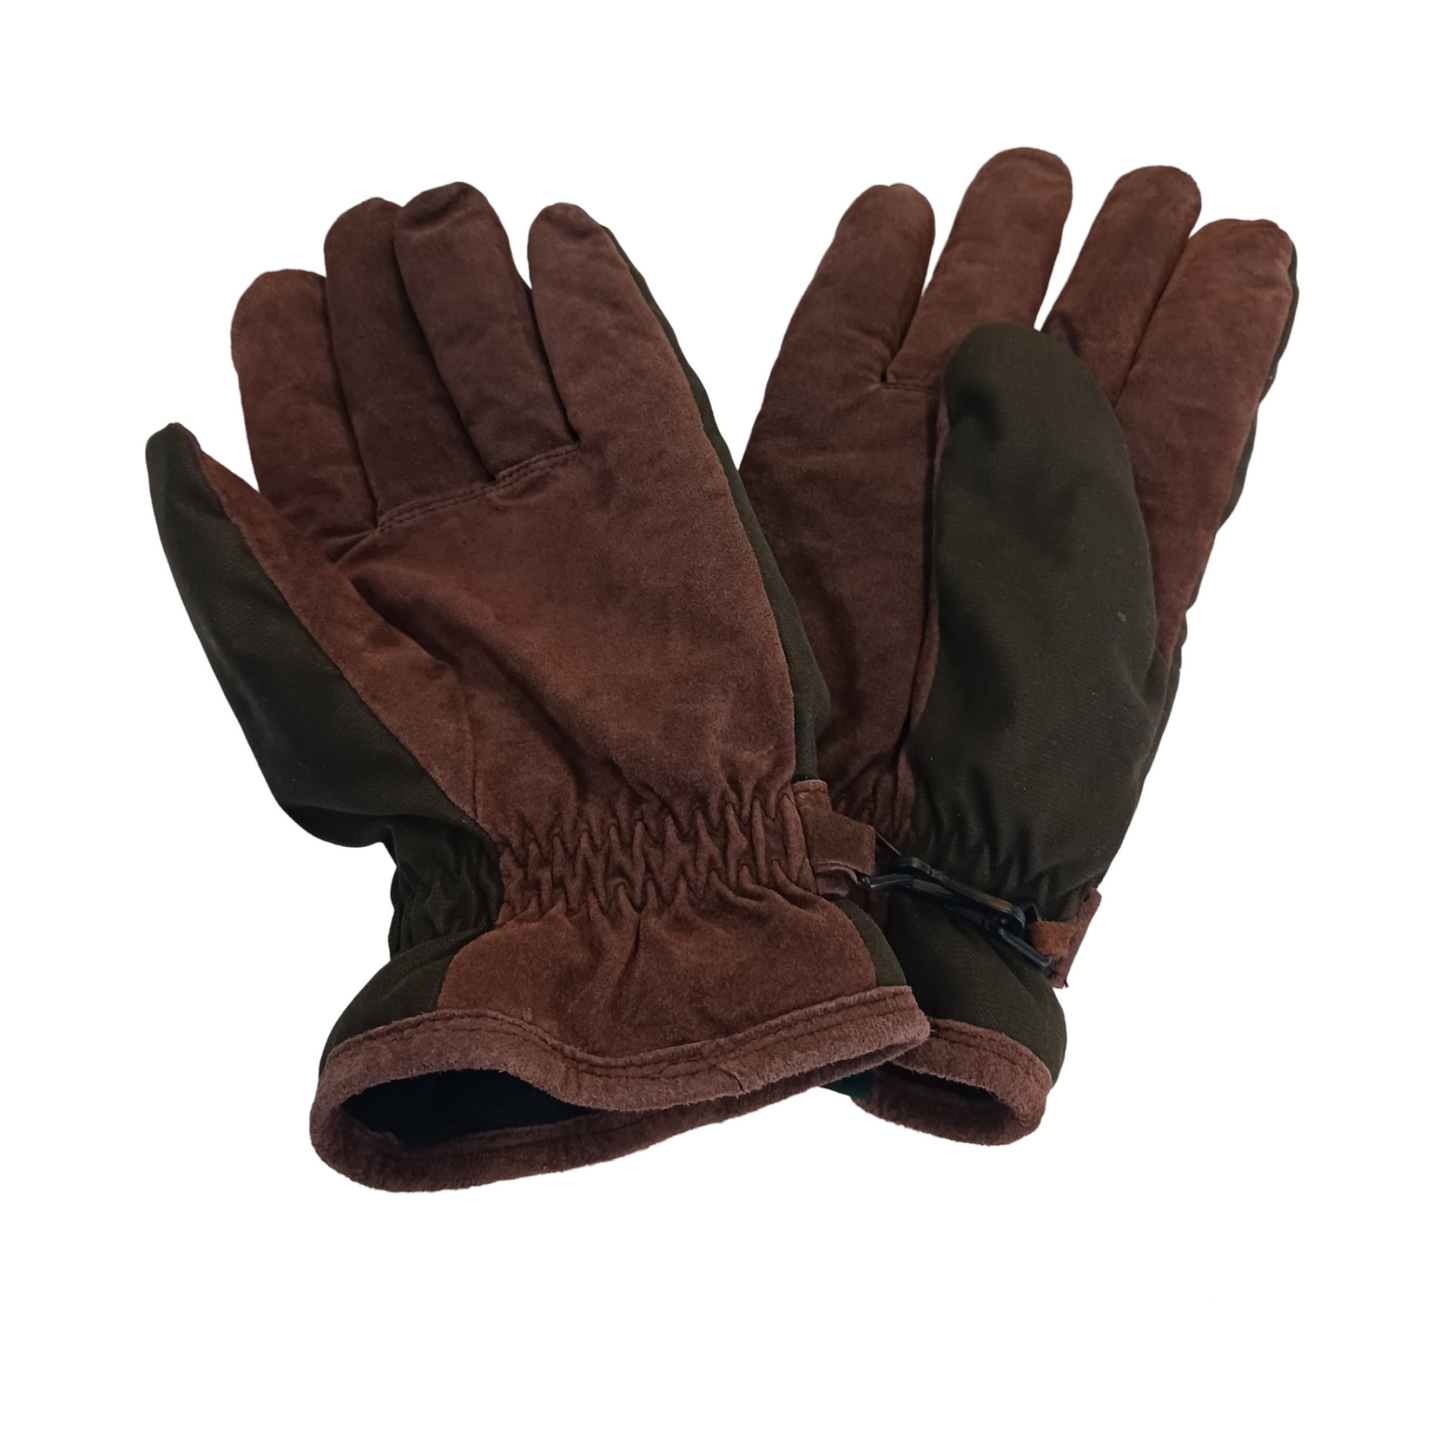 Men's Thermolite Suede Polyester Gloves, Green And Brown, Size XL